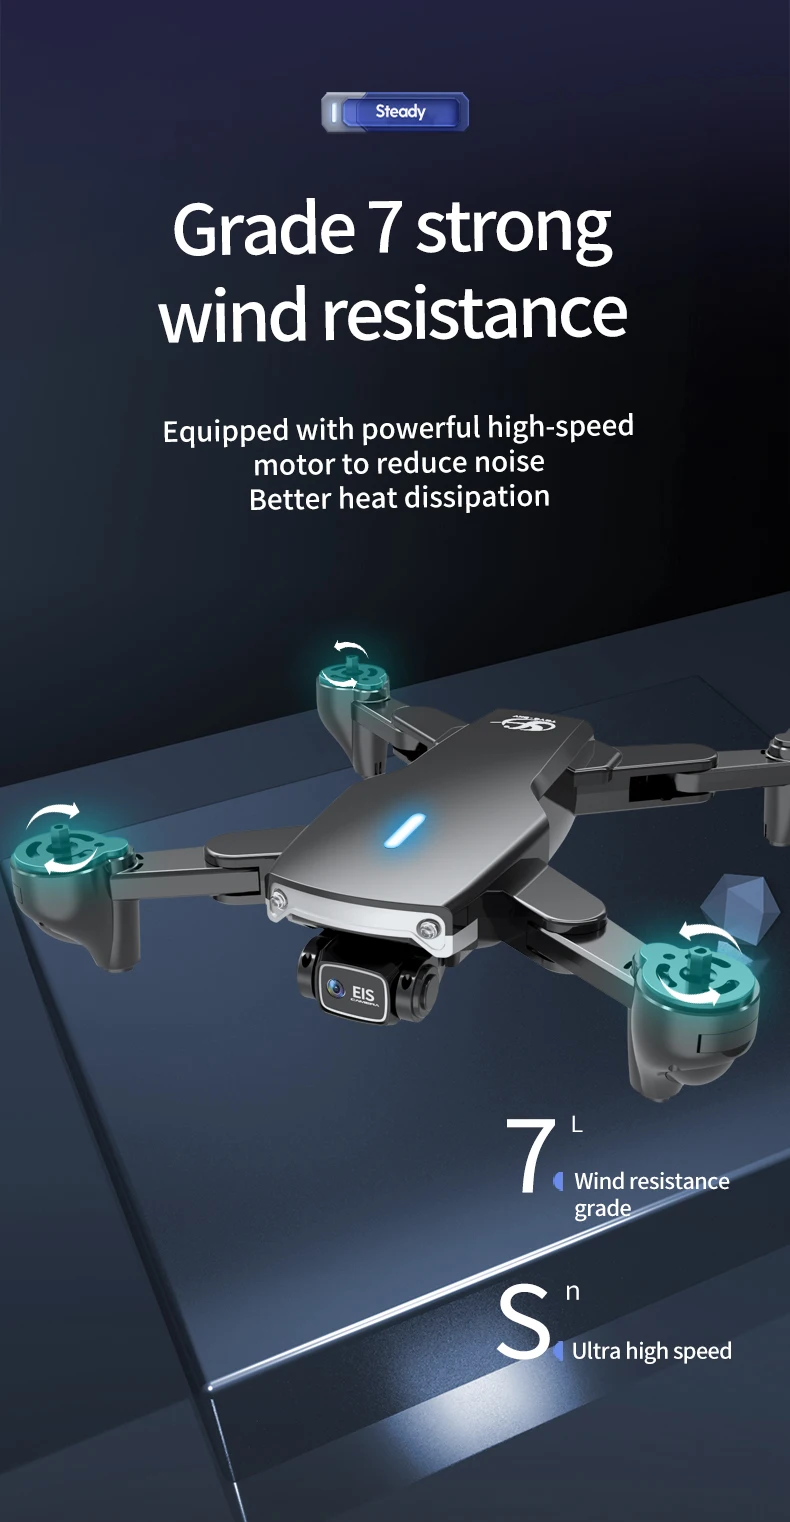 S169 Drone, steady grade 7 strong wind resistance equipped with powerful high-speed motor to